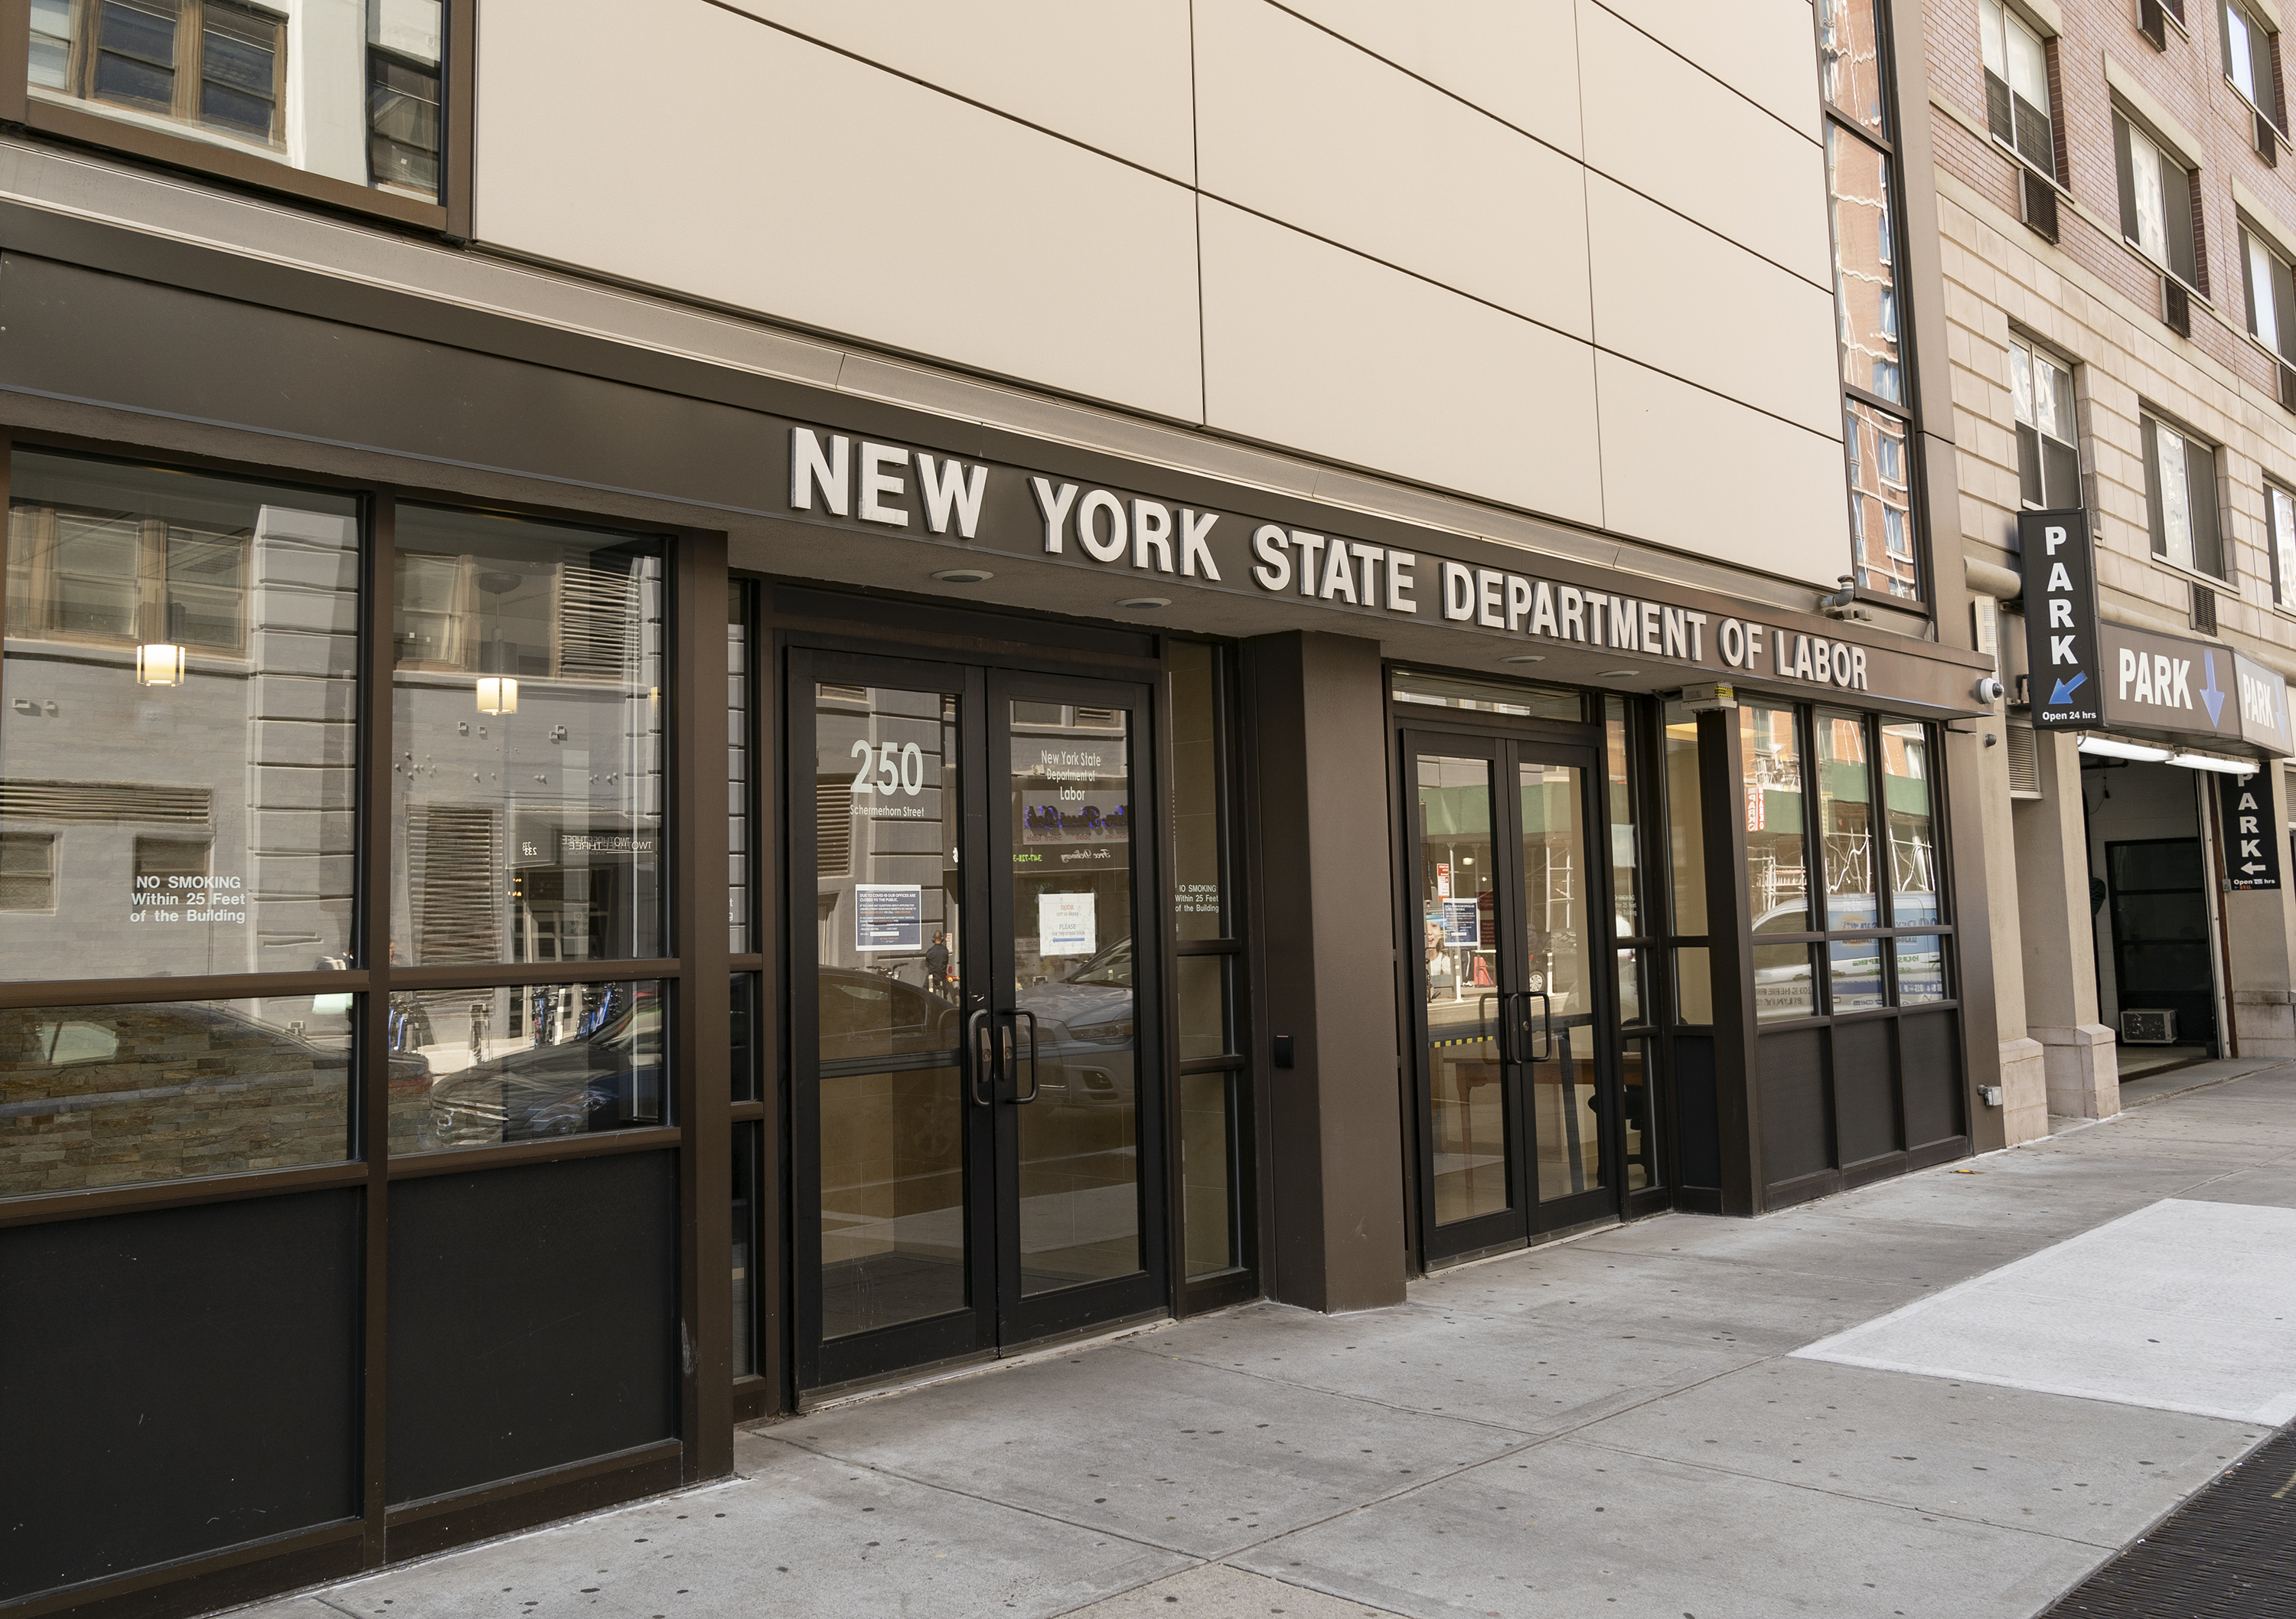 The Brooklyn office of the New York State Department of Labor on March 26, 2020. A sign on the door said the office was closed due to COVID-19 and told people seeking unemployment benefits to apply online or call. (Lev Radin—Pacific Press/LightRocket/Getty Images)